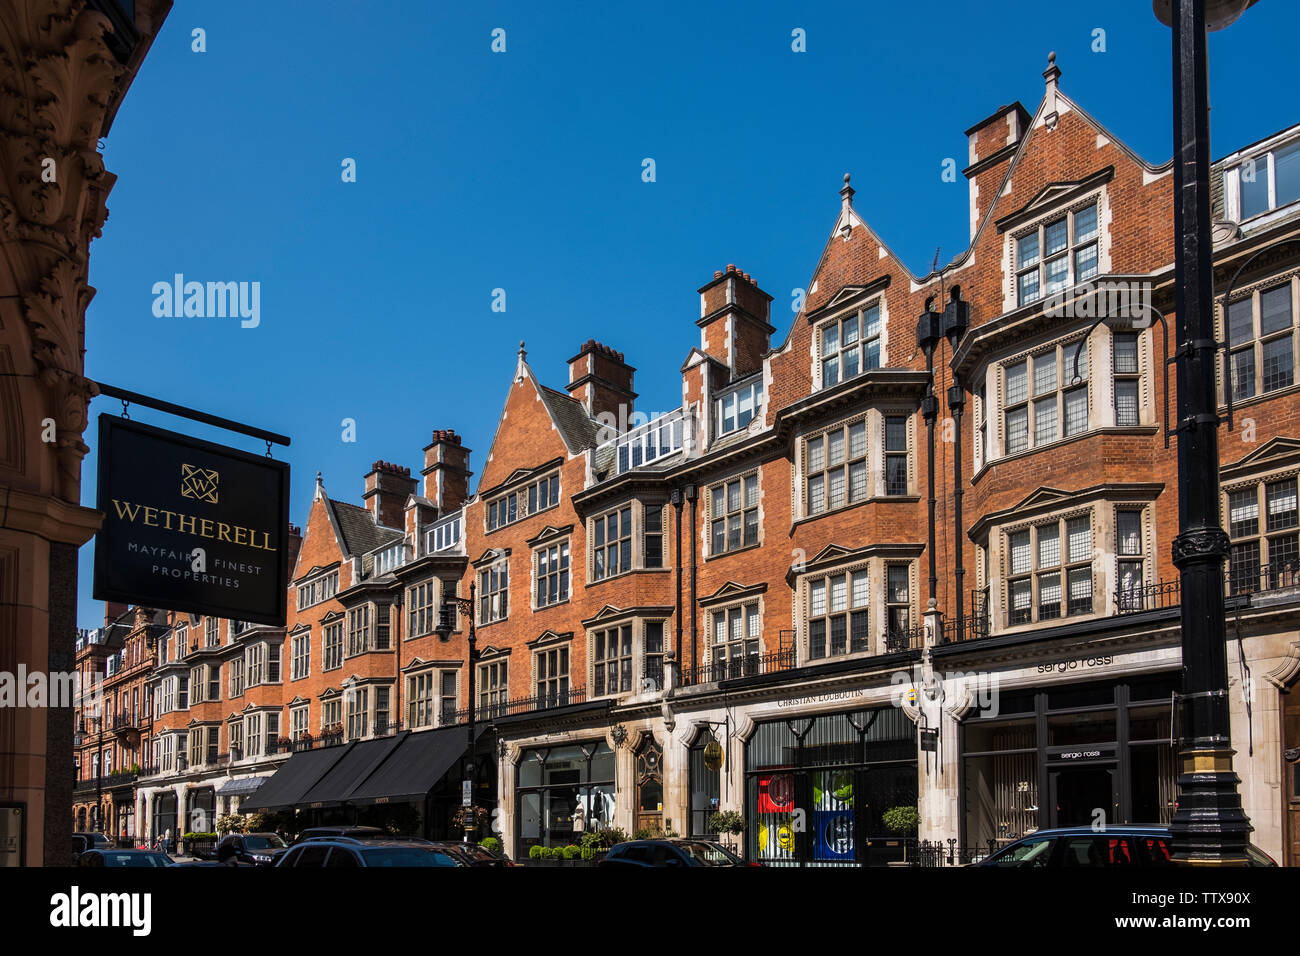 Mount Street, Mayfair, Londres, Angleterre, Royaume-Uni Banque D'Images